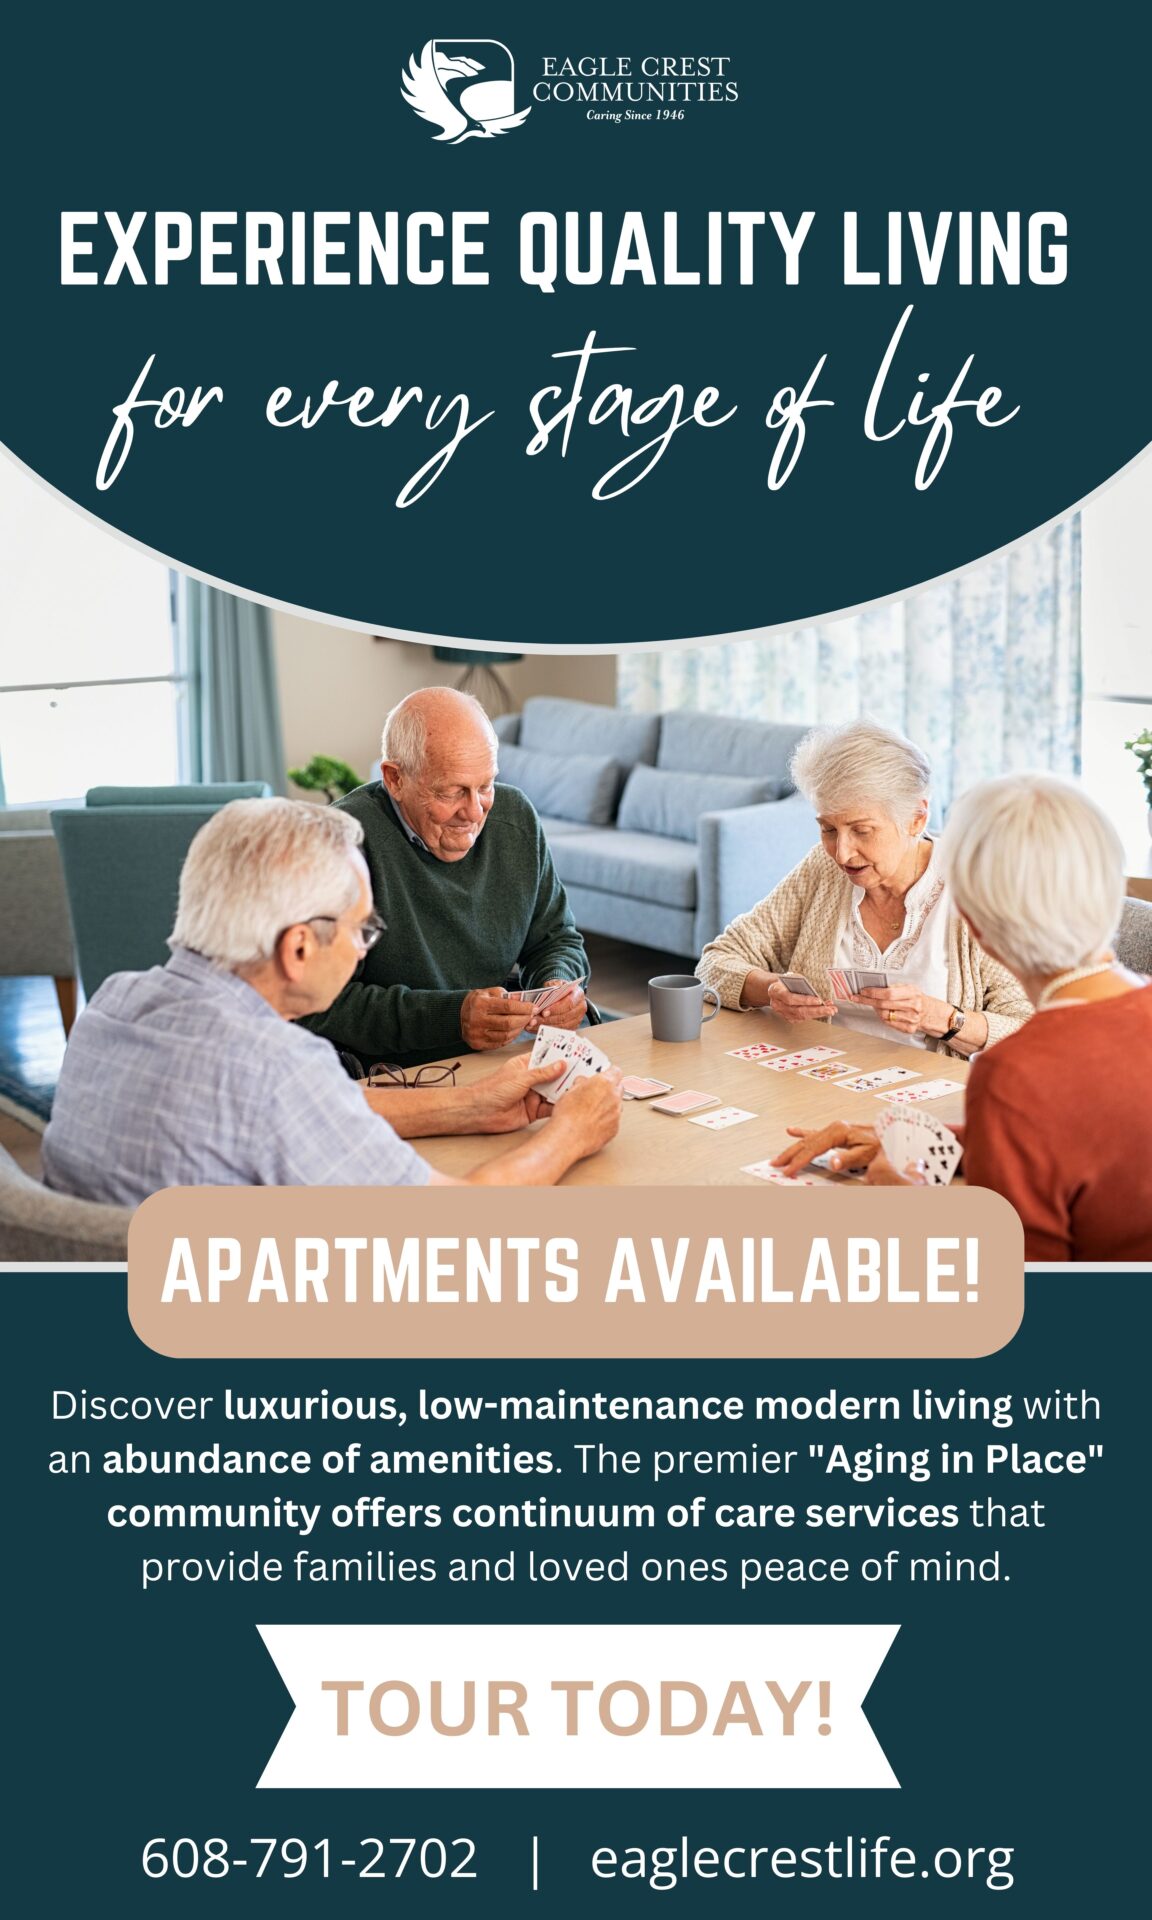 Eagle Crest South is here for every stage of life with our continuum of care services. Please call 608-791-2702 for more information. *Picture: Seniors gathered around a table playing cards.